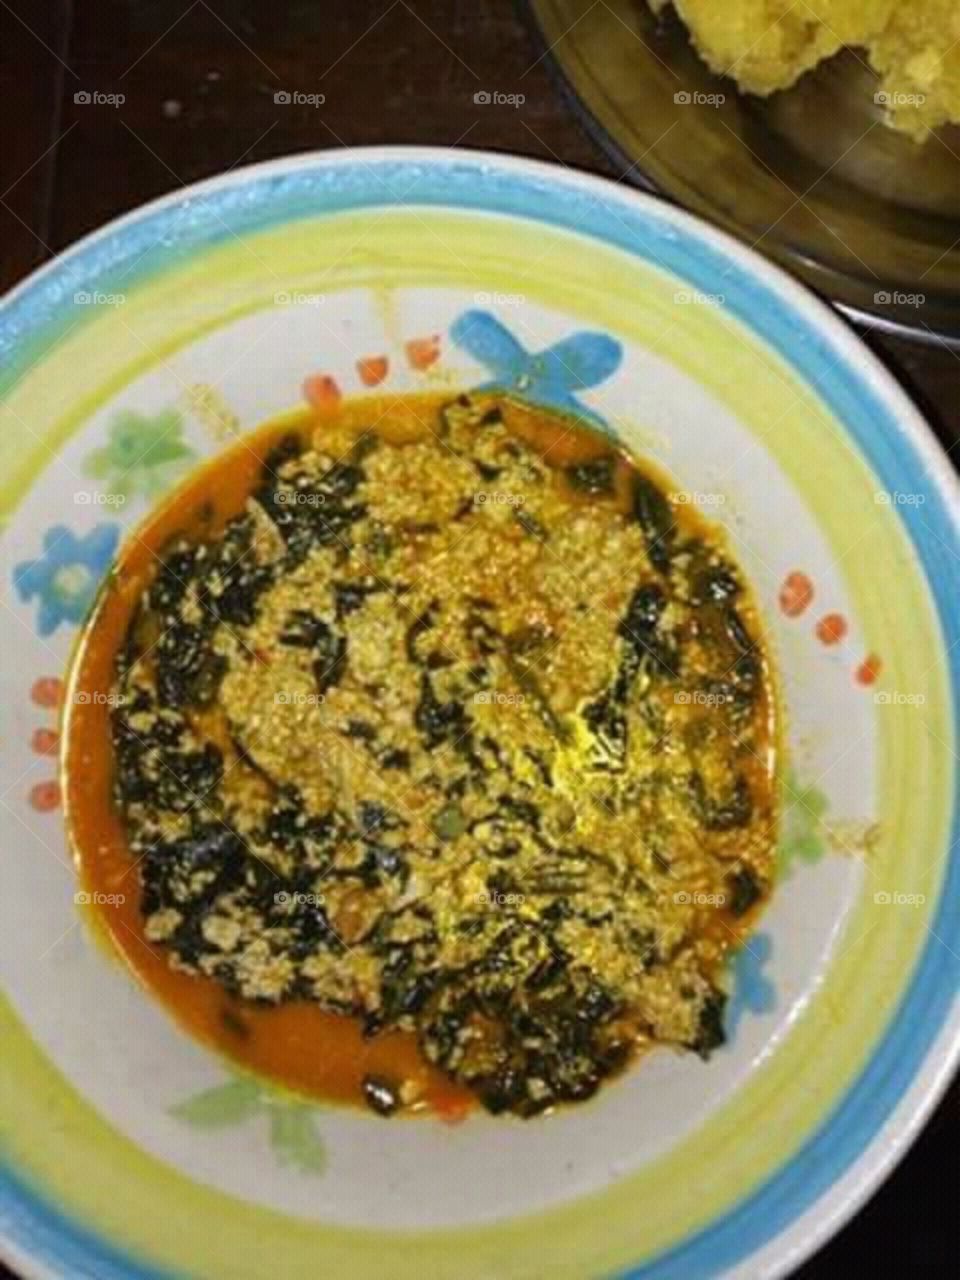 This is one of the many rich delicacies of the South-Eastern Nigeria, Popularly known as the Indigenous people of Biafra and they call this one "Egusi-Soup" ... It is usually taken with Fufu,garri,semovita,wheat or corn mill ... visitors take notes